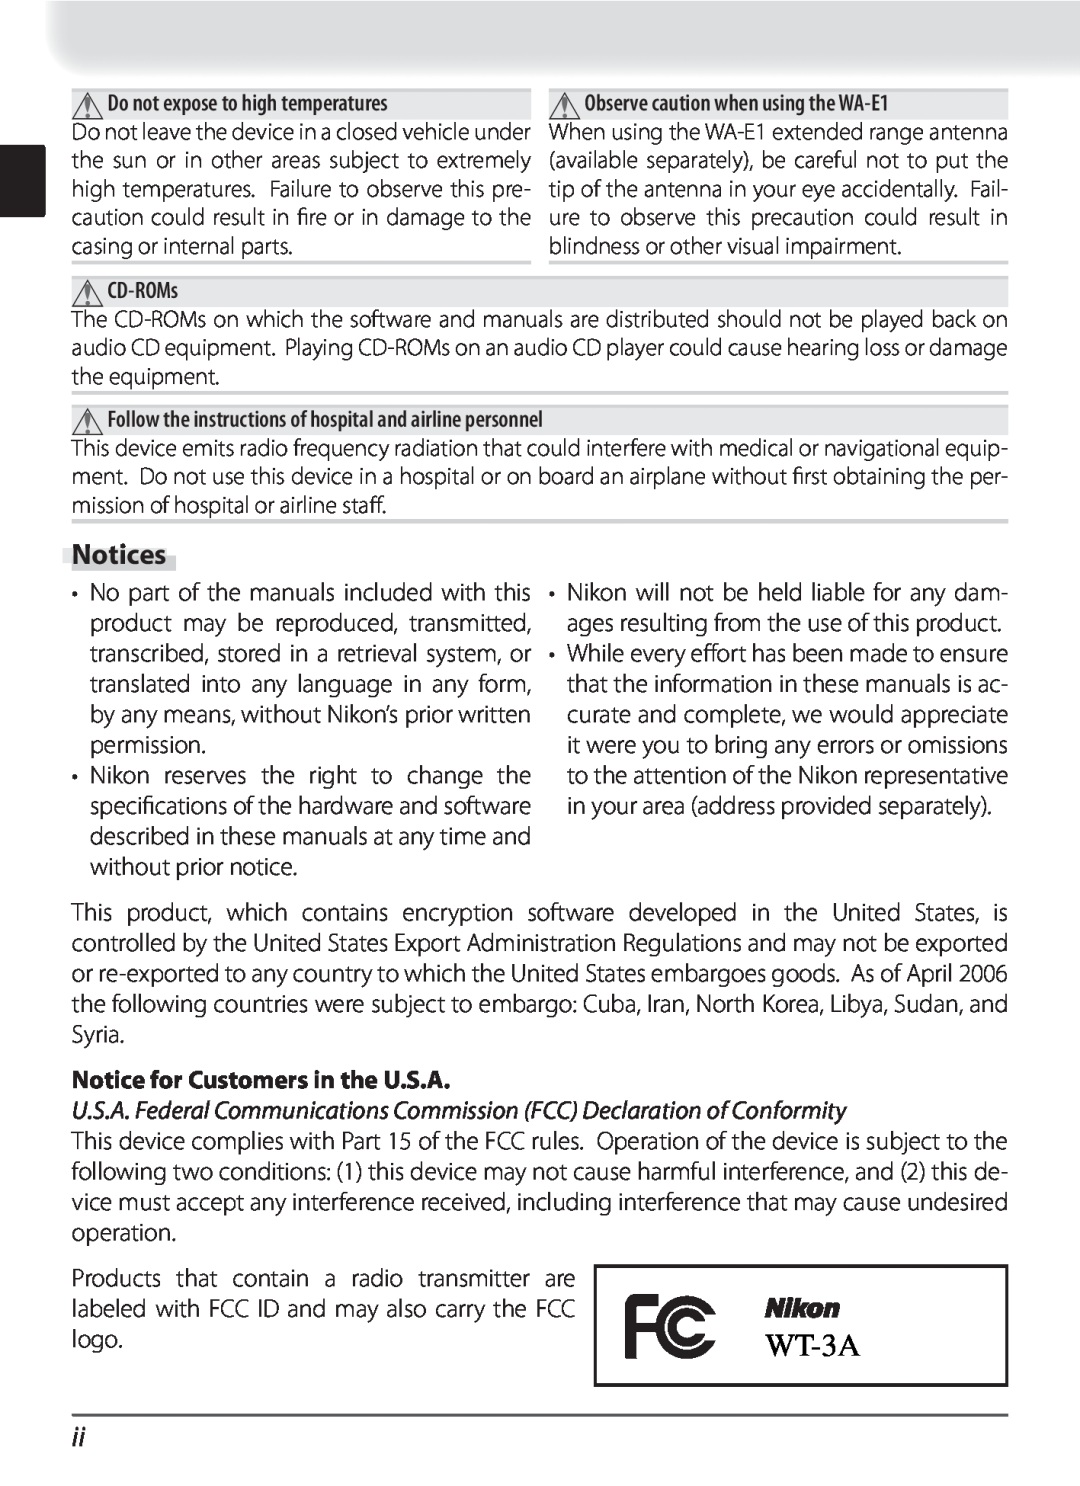 Nikon user manual Notices, Notice for Customers in the U.S.A, WT-3A 